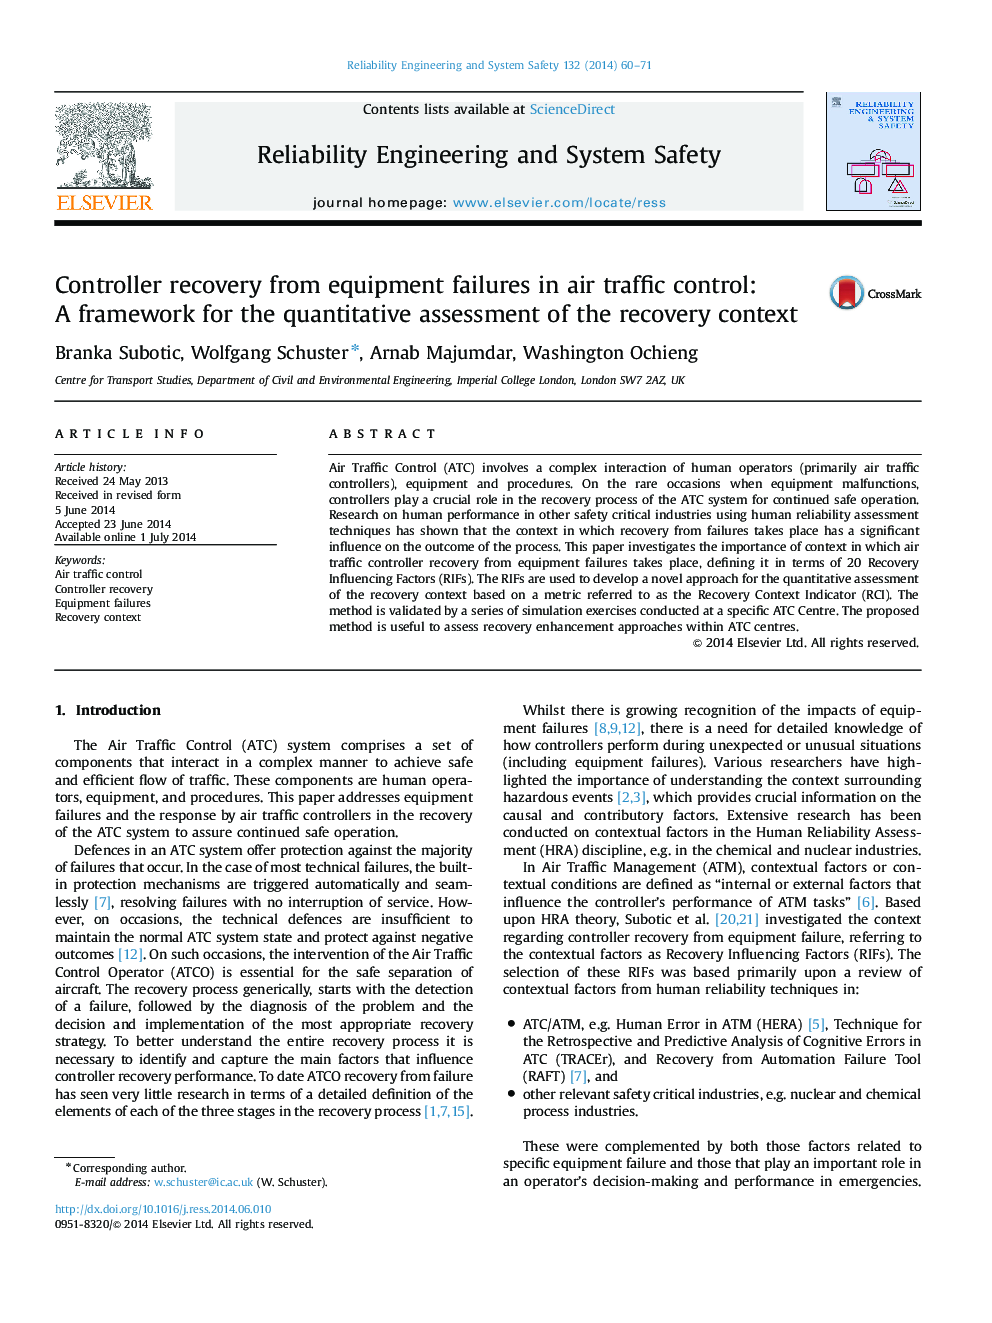 Controller recovery from equipment failures in air traffic control: A framework for the quantitative assessment of the recovery context